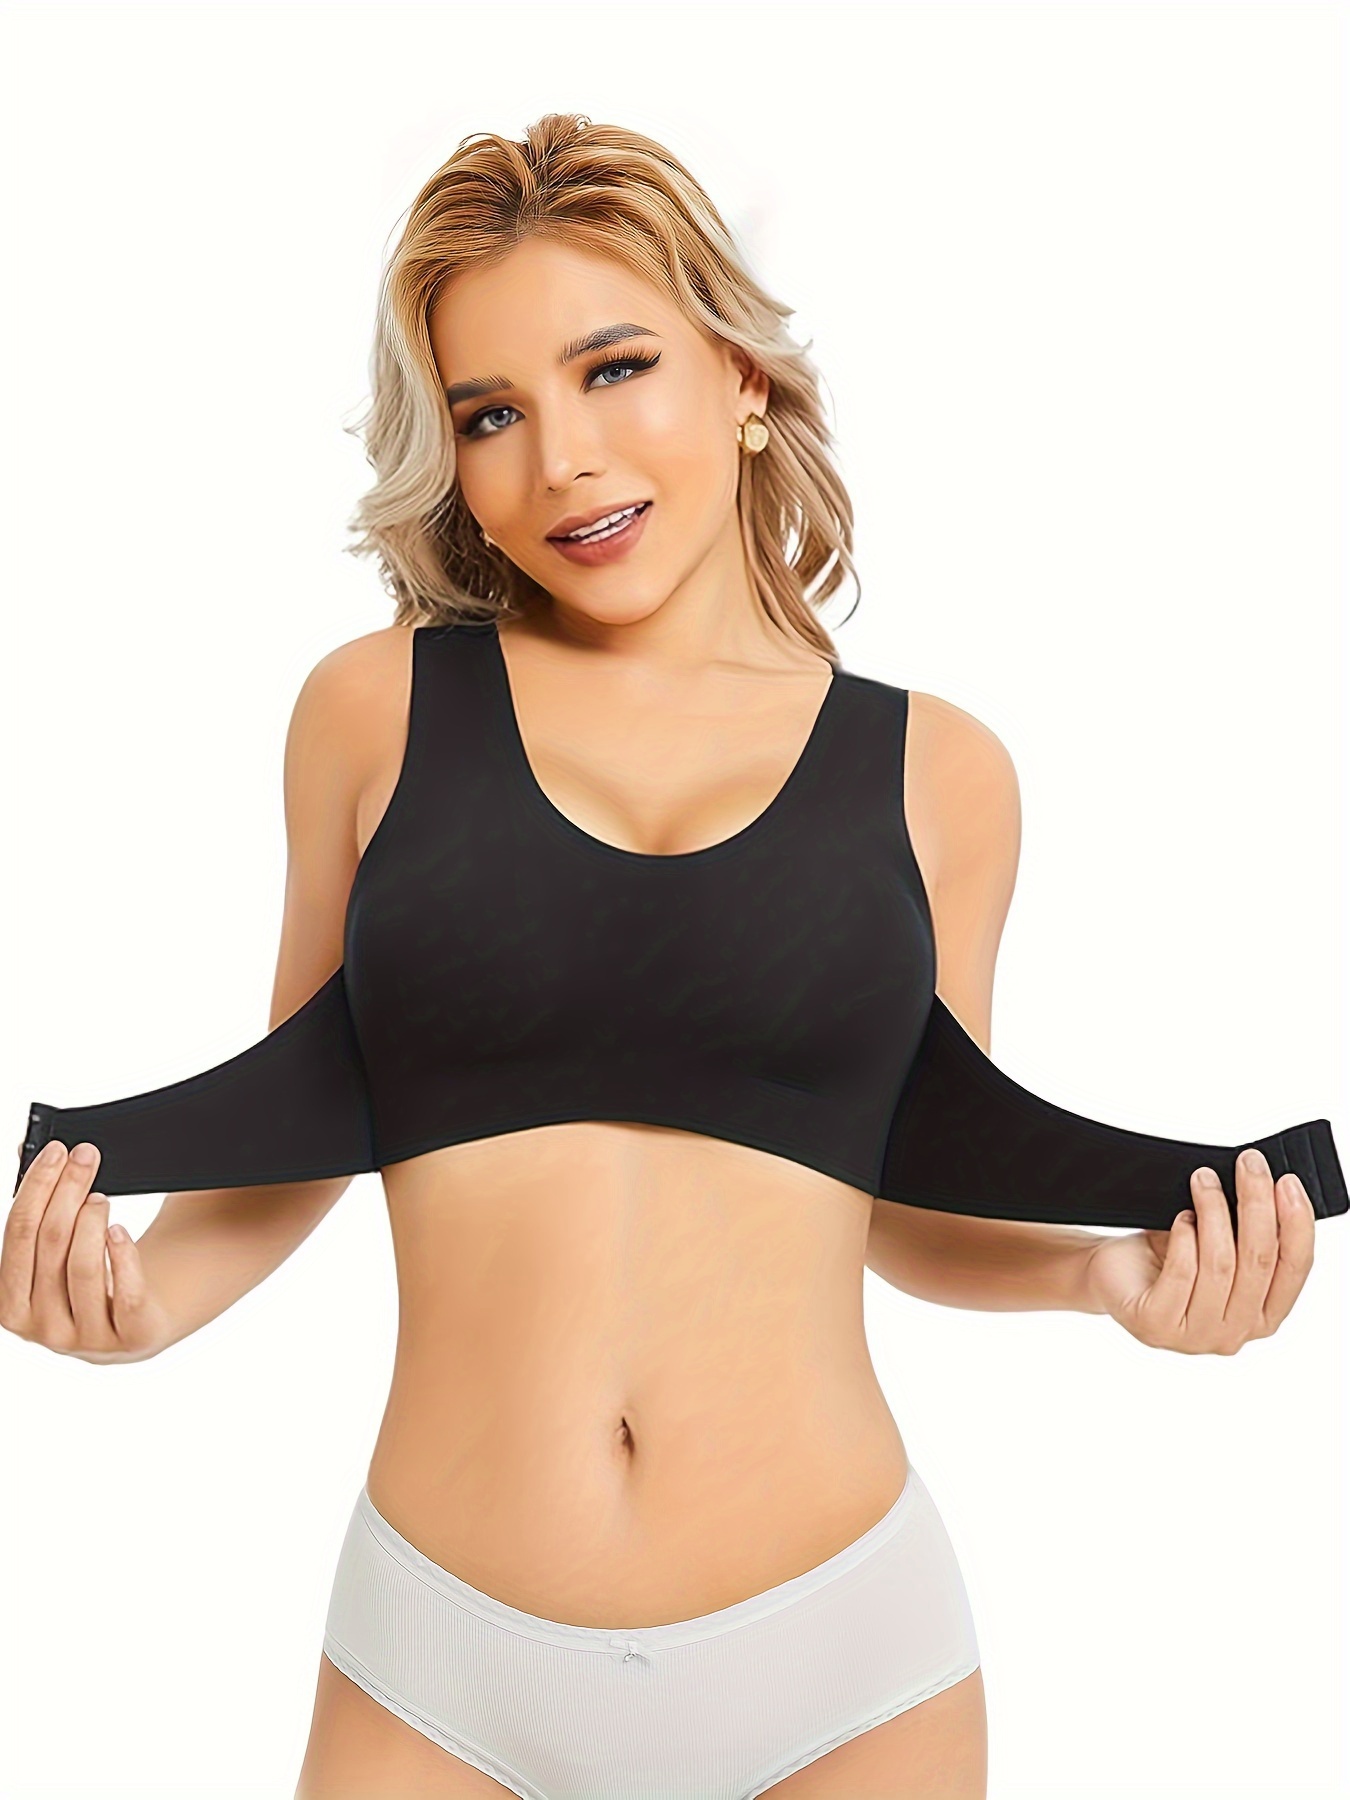 CPSUN Push Up Bra for Small Breasts Sports Bra Camisole Crop Tops